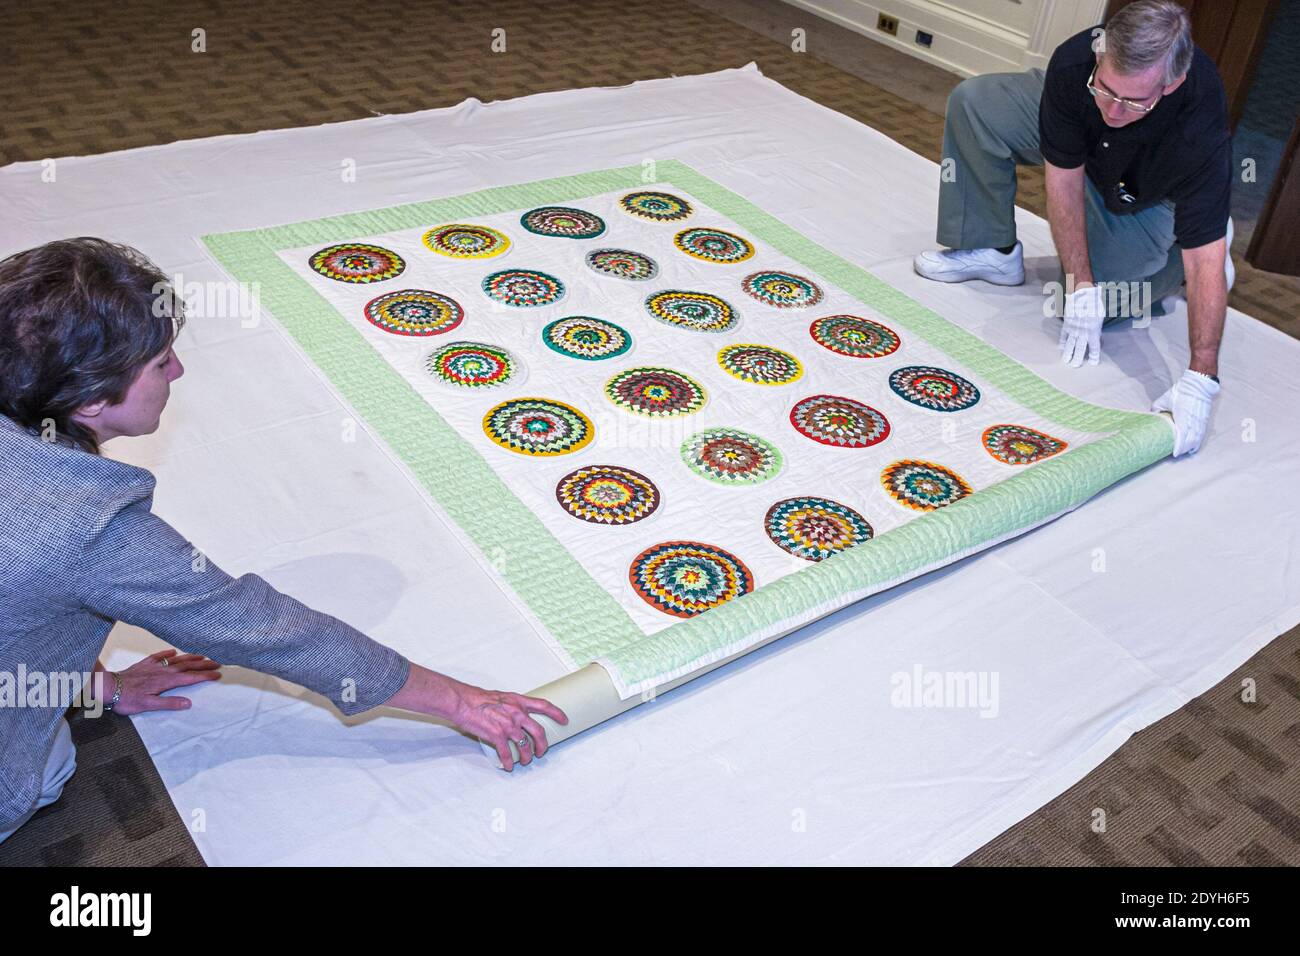 Alabama Montgomery State Department of Archives & History,Pine Burr State Quilt archivists historians unwrapping, Stock Photo